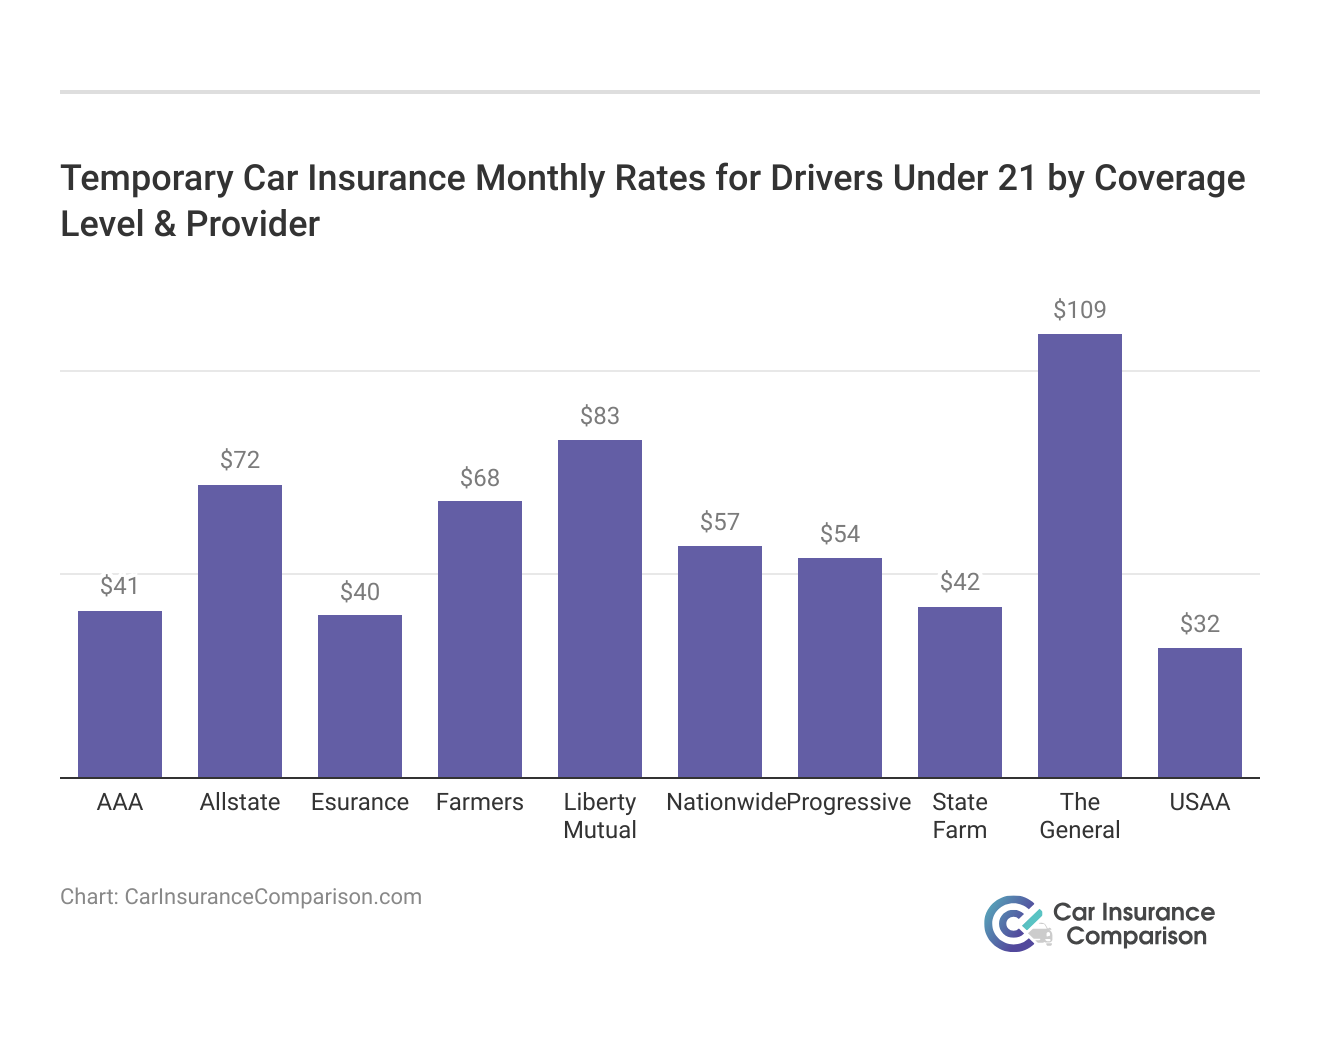 <h3>Temporary Car Insurance Monthly Rates for Drivers Under 21 by Coverage Level & Provider</h3>